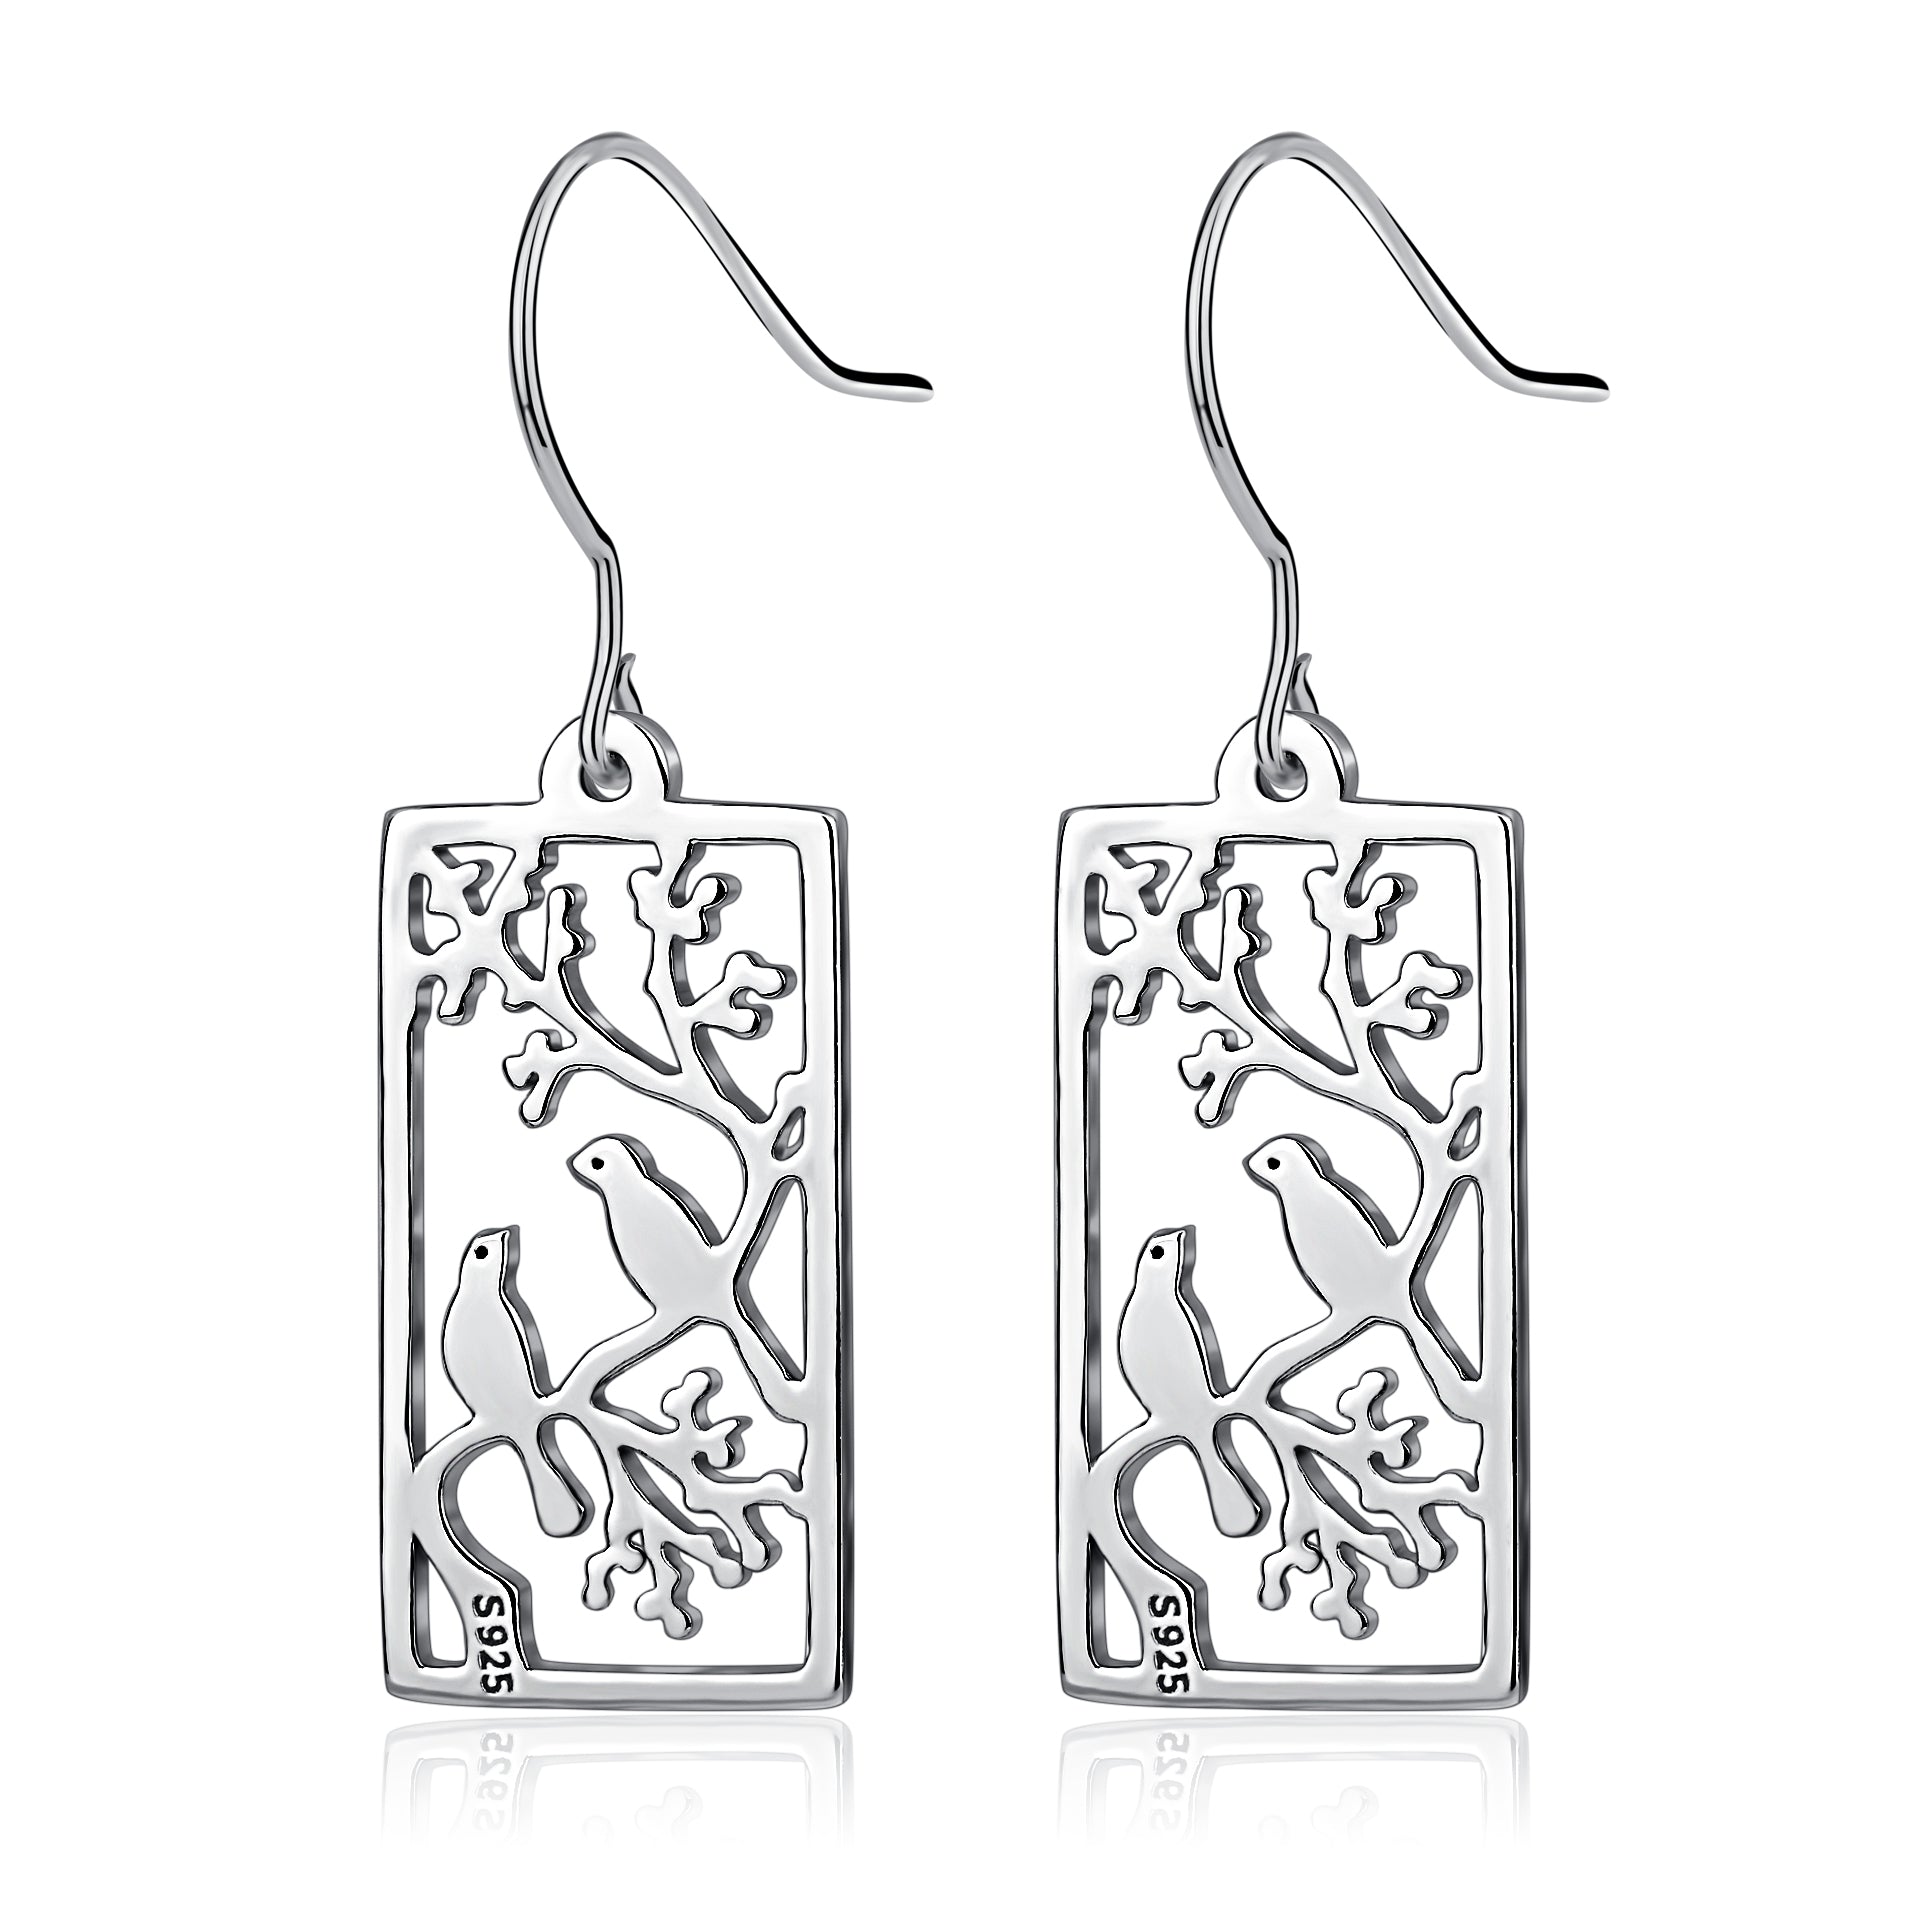 Many birds earring stand on the branches and engrave earrings design